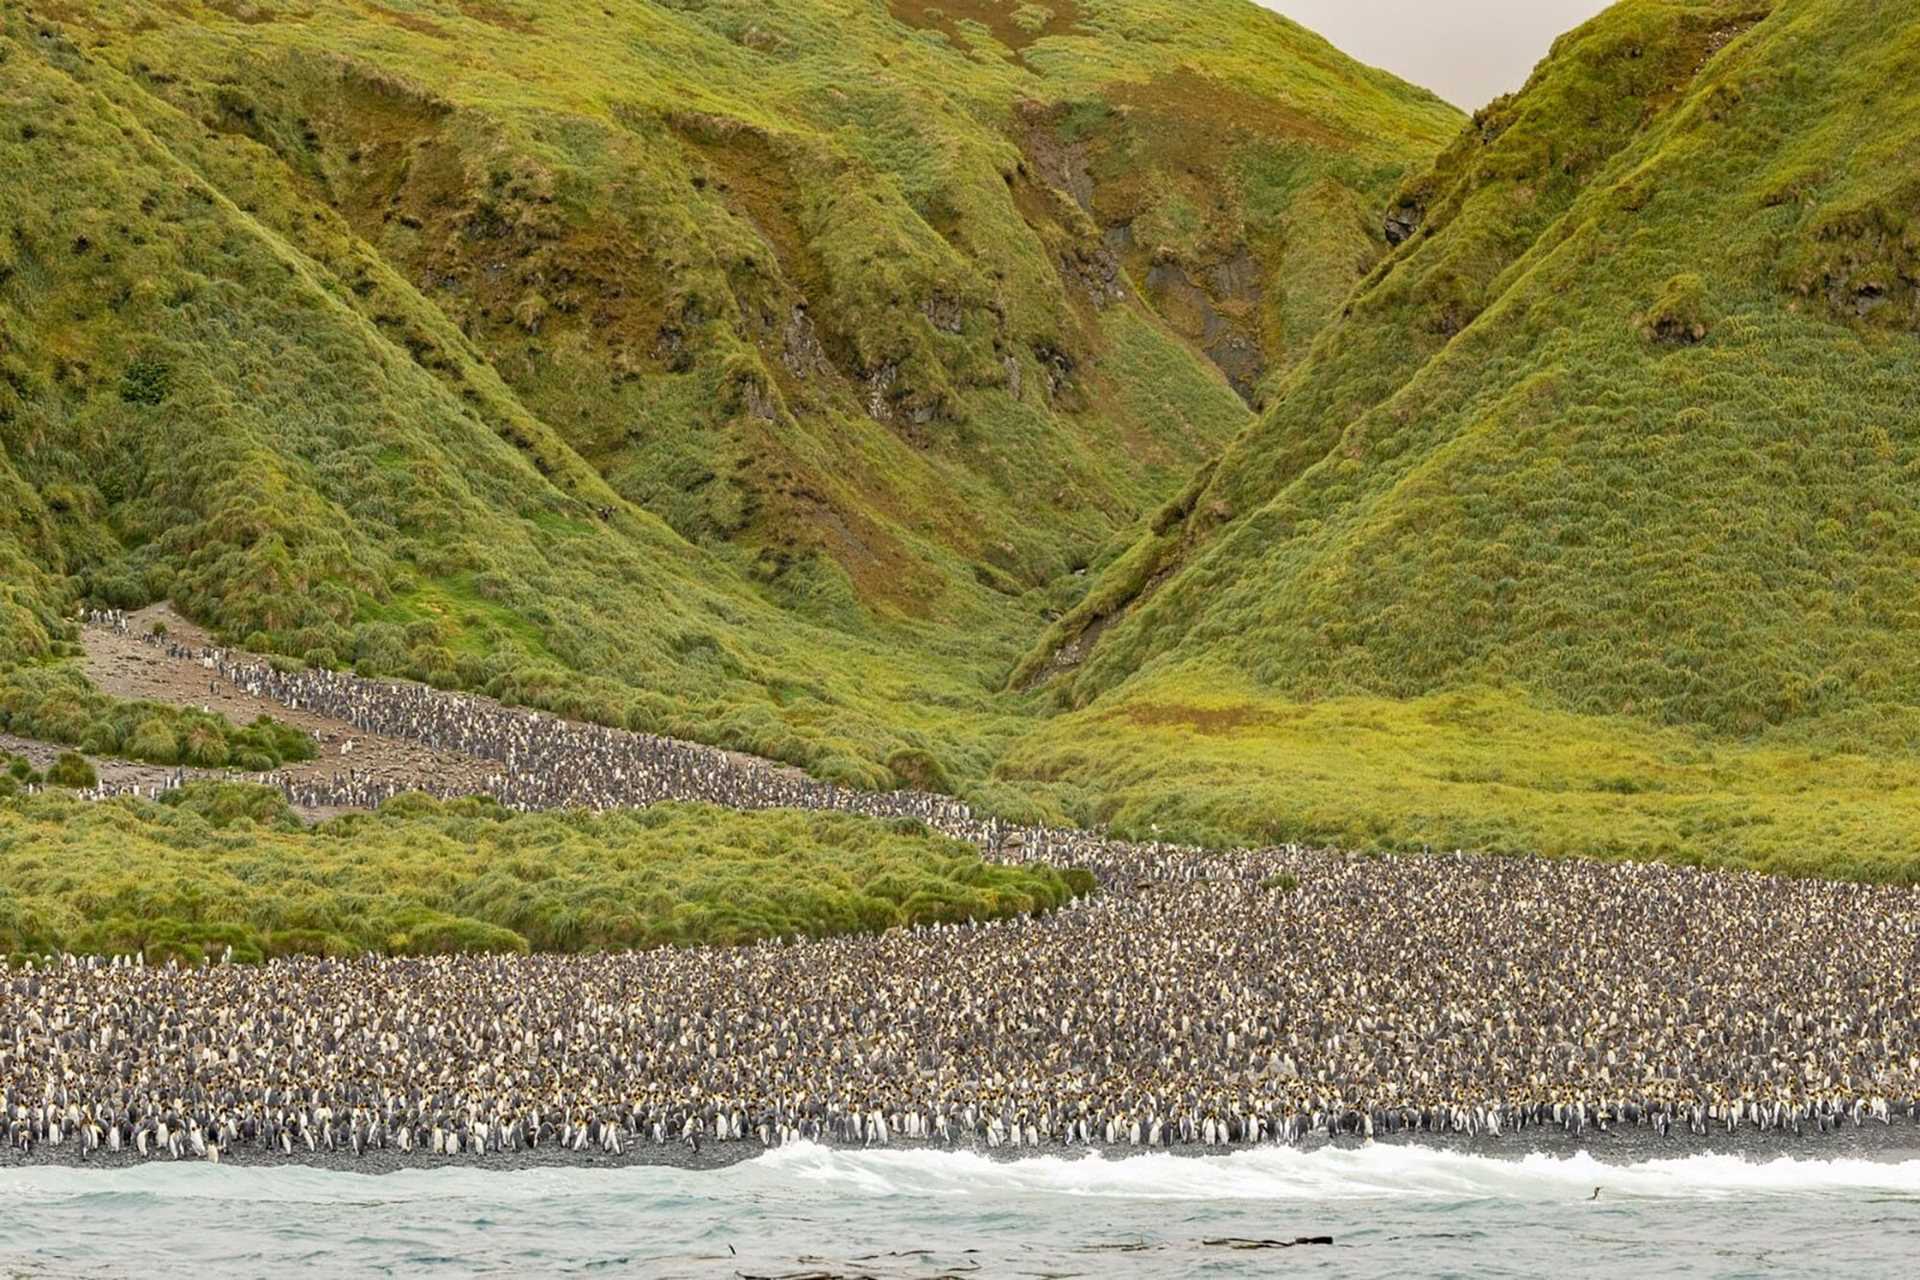 thousands of penguins in front of a green grassy hill